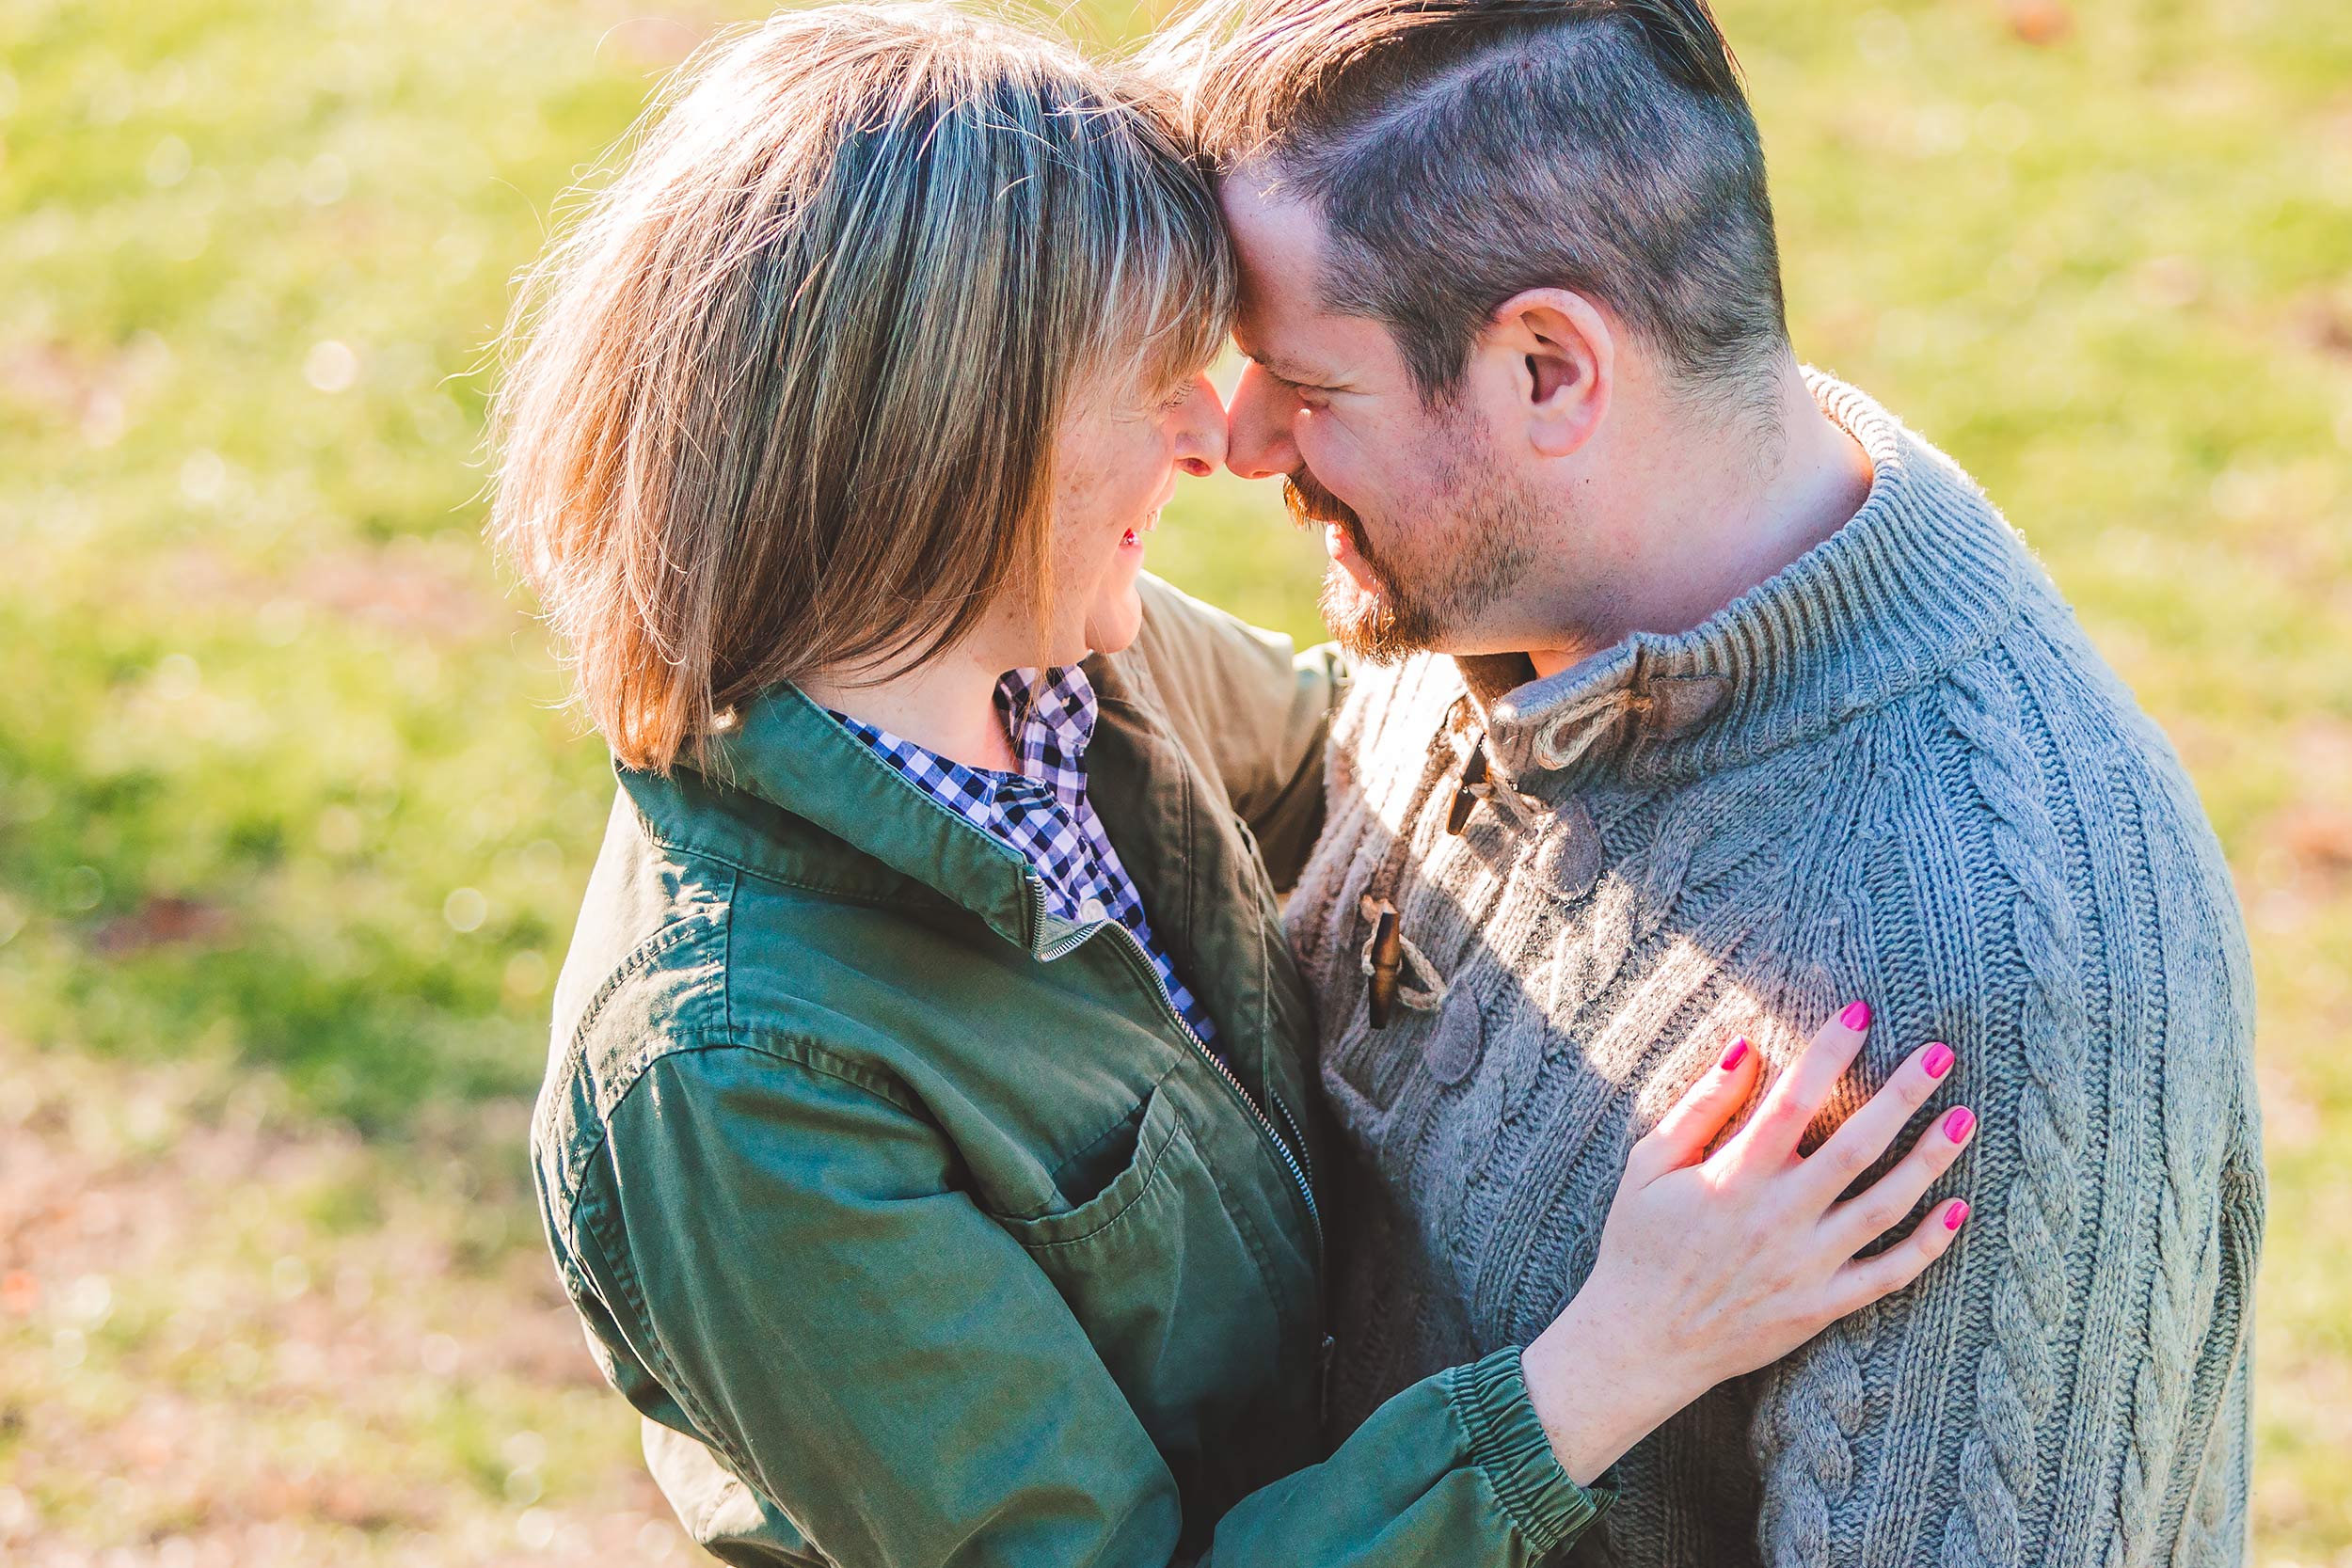 Wakefield Engagement Photographer | Stephen Grant Photography